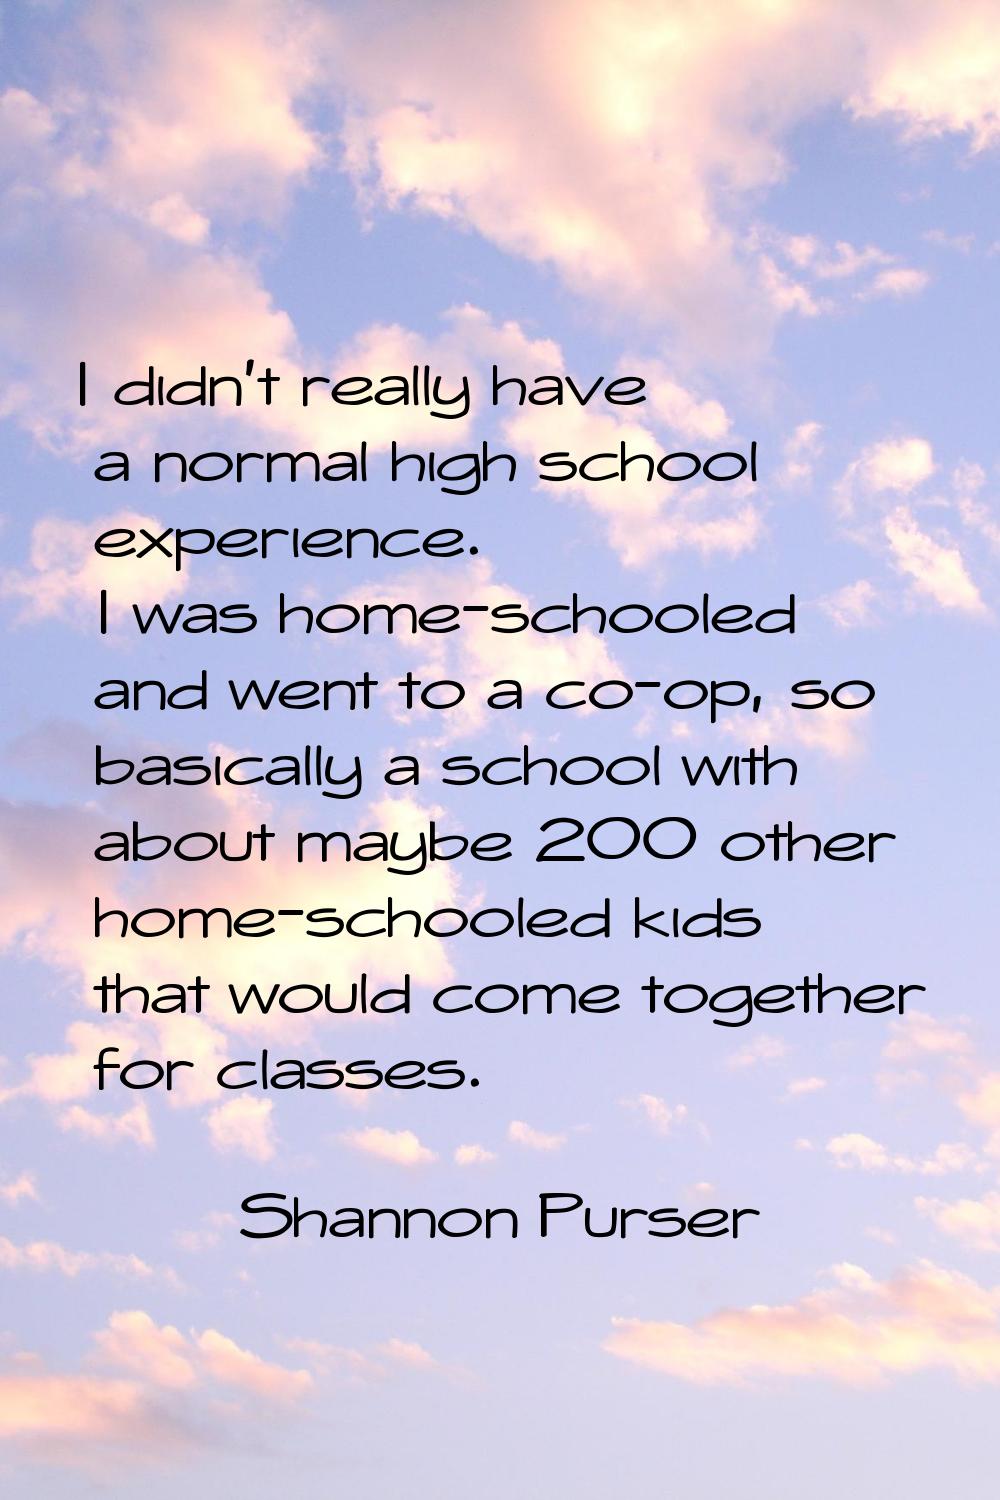 I didn't really have a normal high school experience. I was home-schooled and went to a co-op, so b